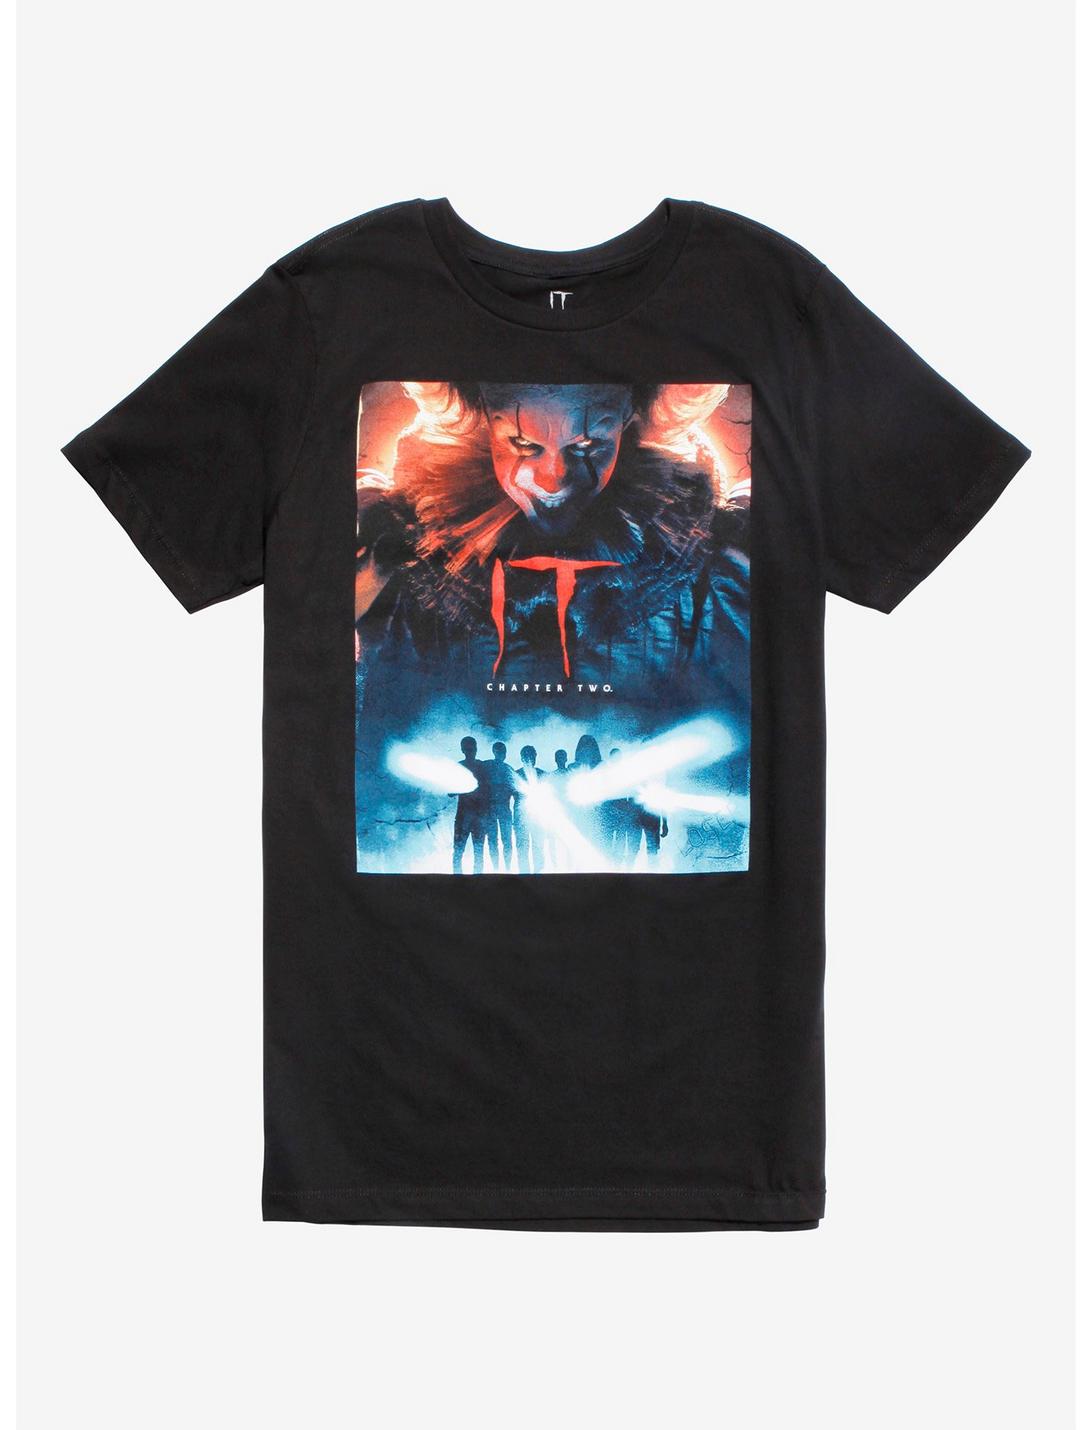 IT Chapter Two Movie Poster T-Shirt Hot Topic Exclusive, BLACK, hi-res